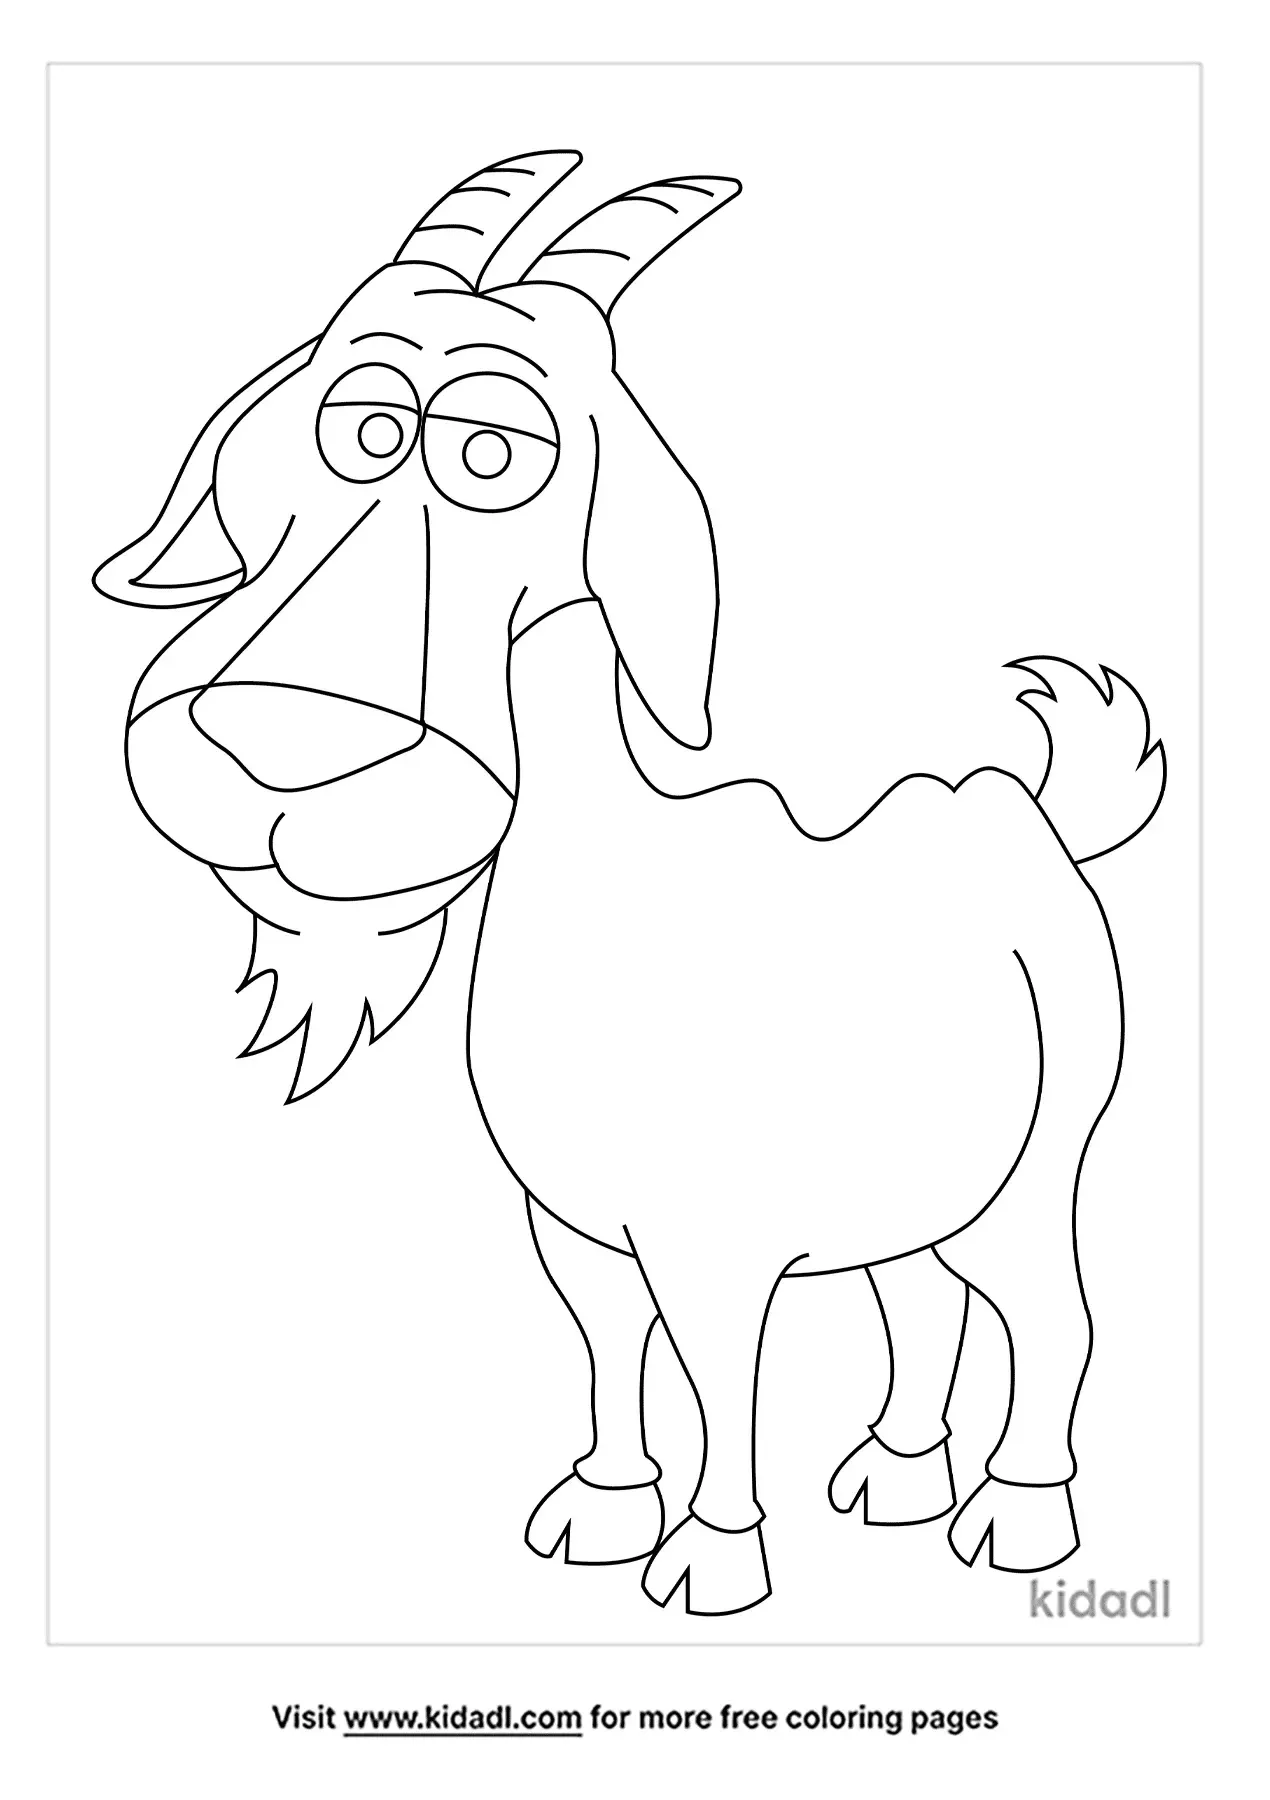 Free Billy Goat Coloring Page | Coloring Page Printables | Kidadl